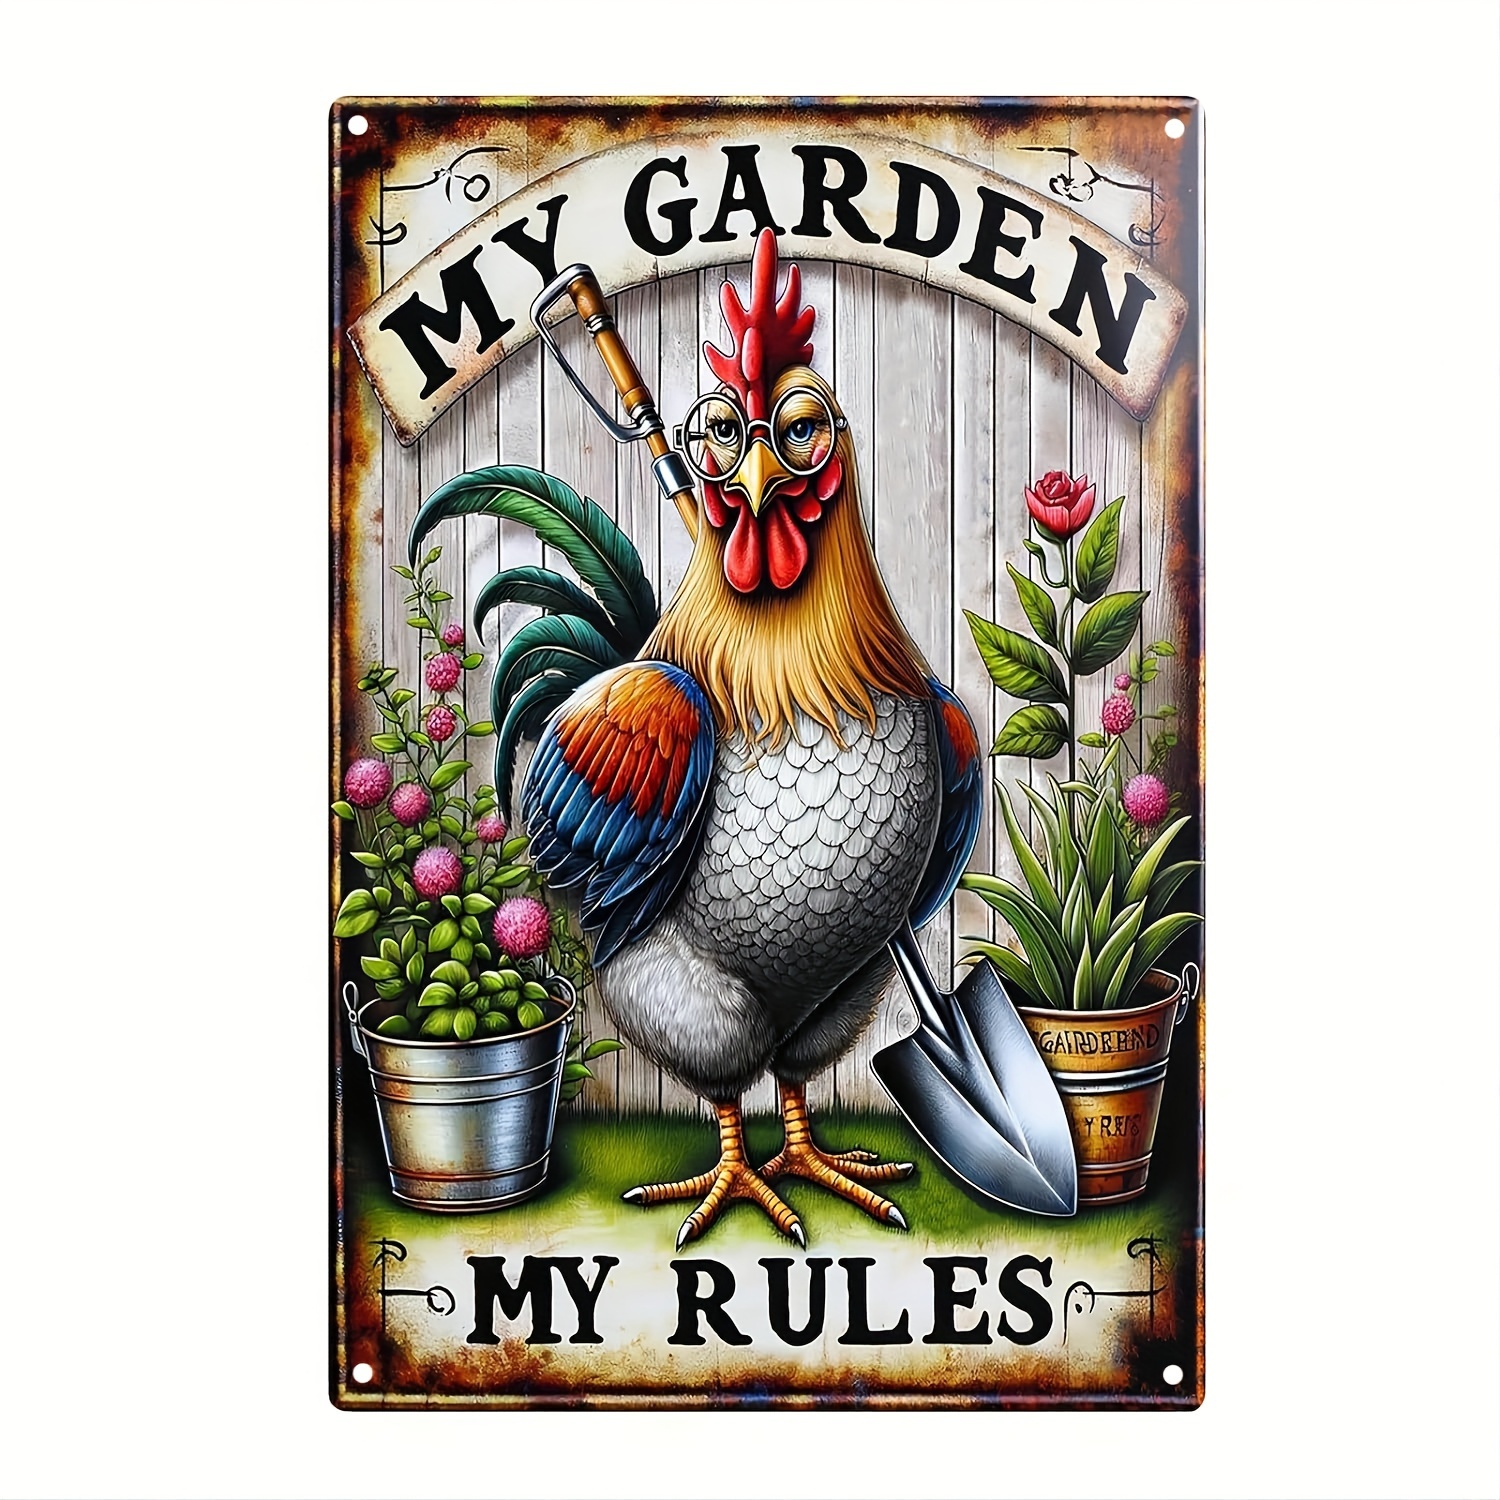 

1pc Funny Gardening Metal Poster "my Garden My Rules" Wall Art Aluminum Chicken Tin Signage For Garden, Farmhouse, Chicken Coop Decor, Gift For Garden Lovers 8x12 Inches